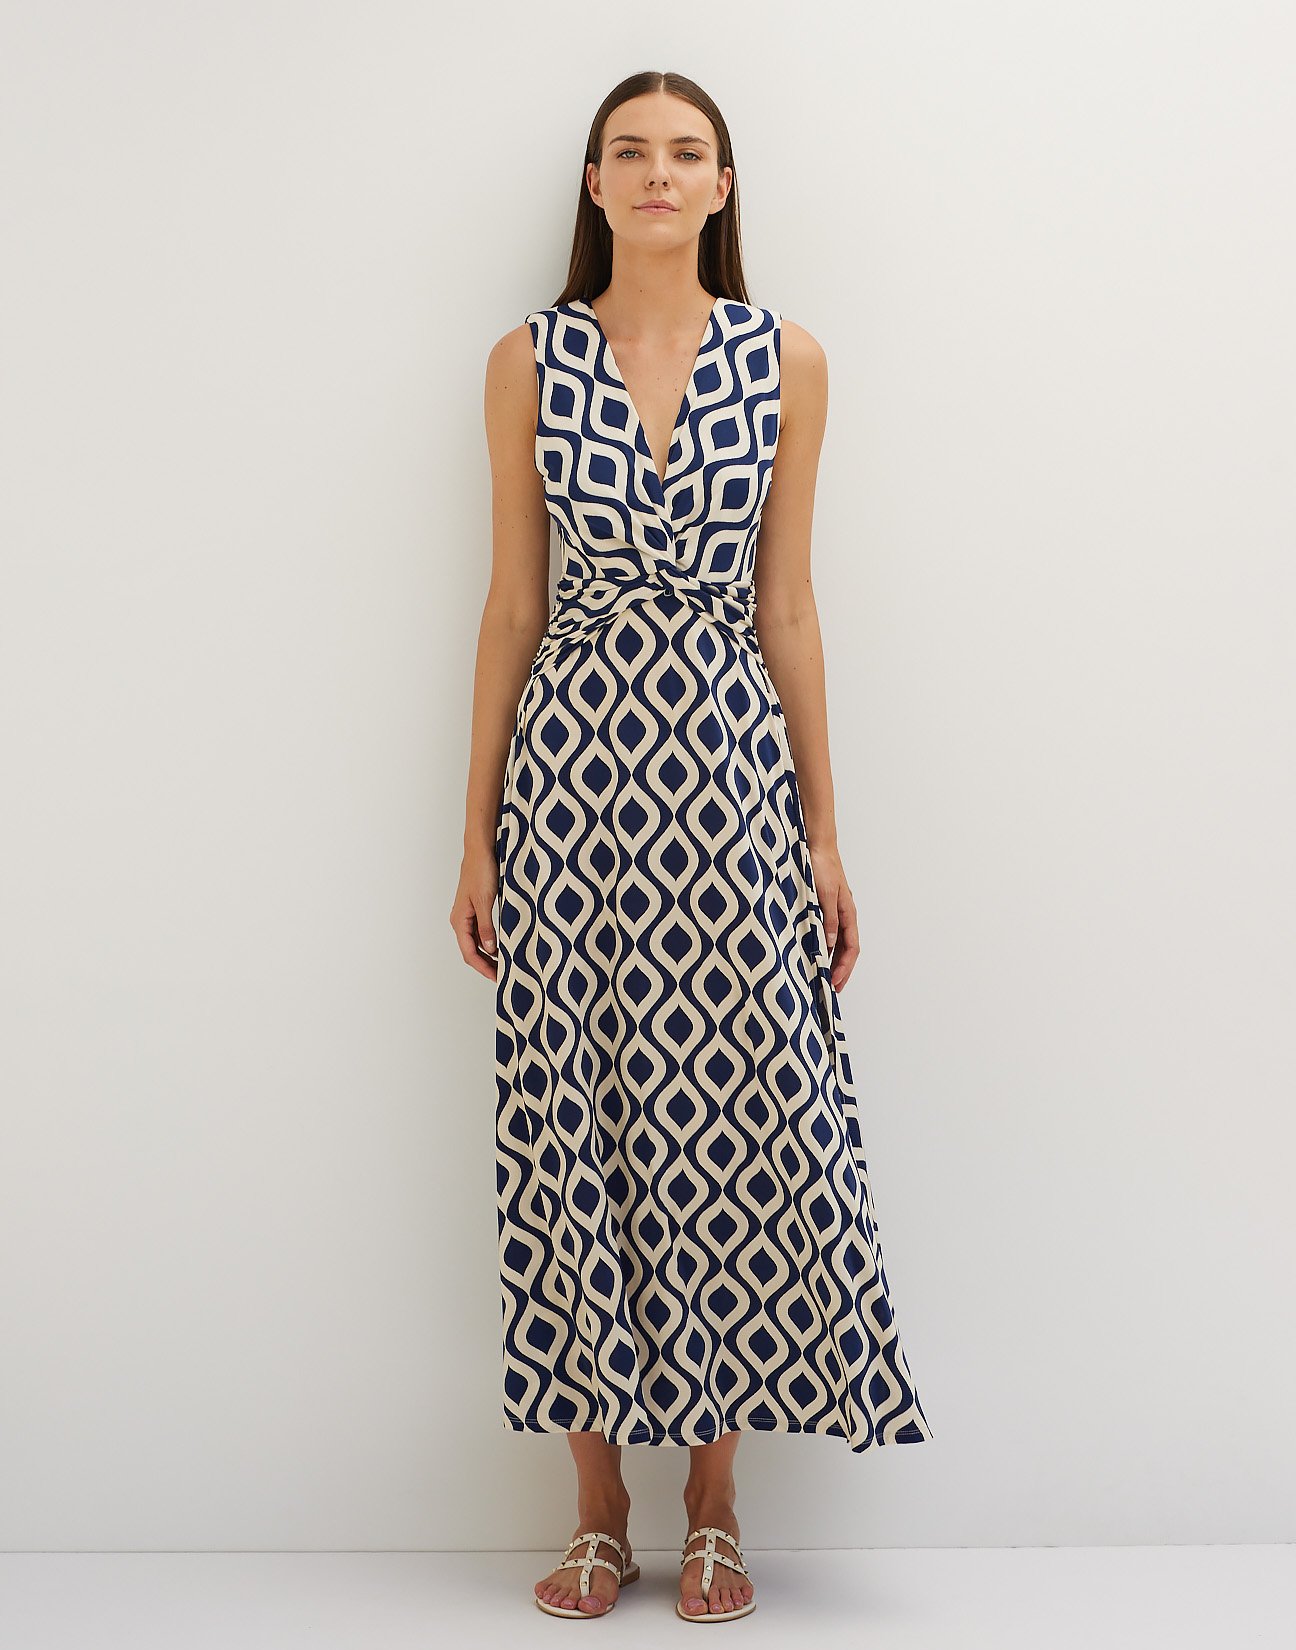 Printed dress with knot